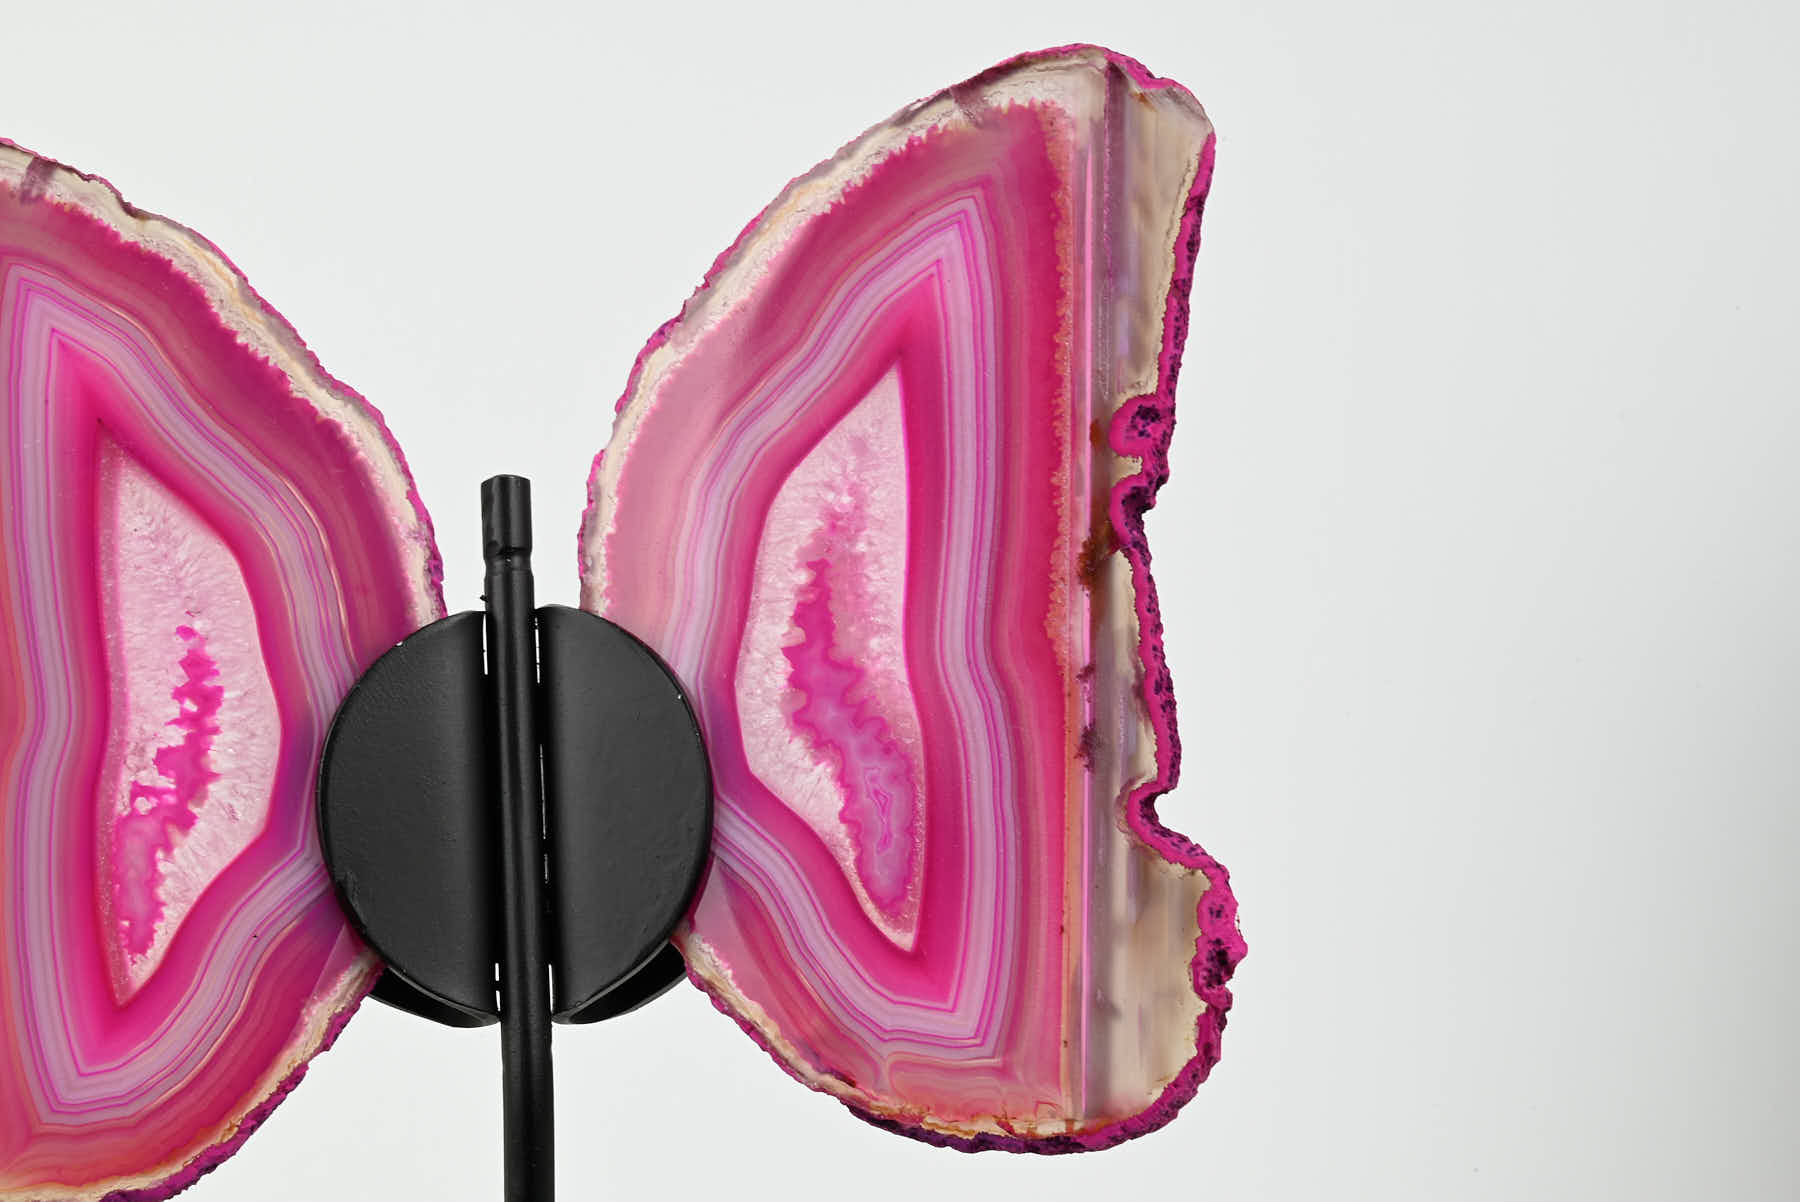 Pink Agate Butterfly on Stand - 0.76kg and 20cm Tall - #BUPINK-10012